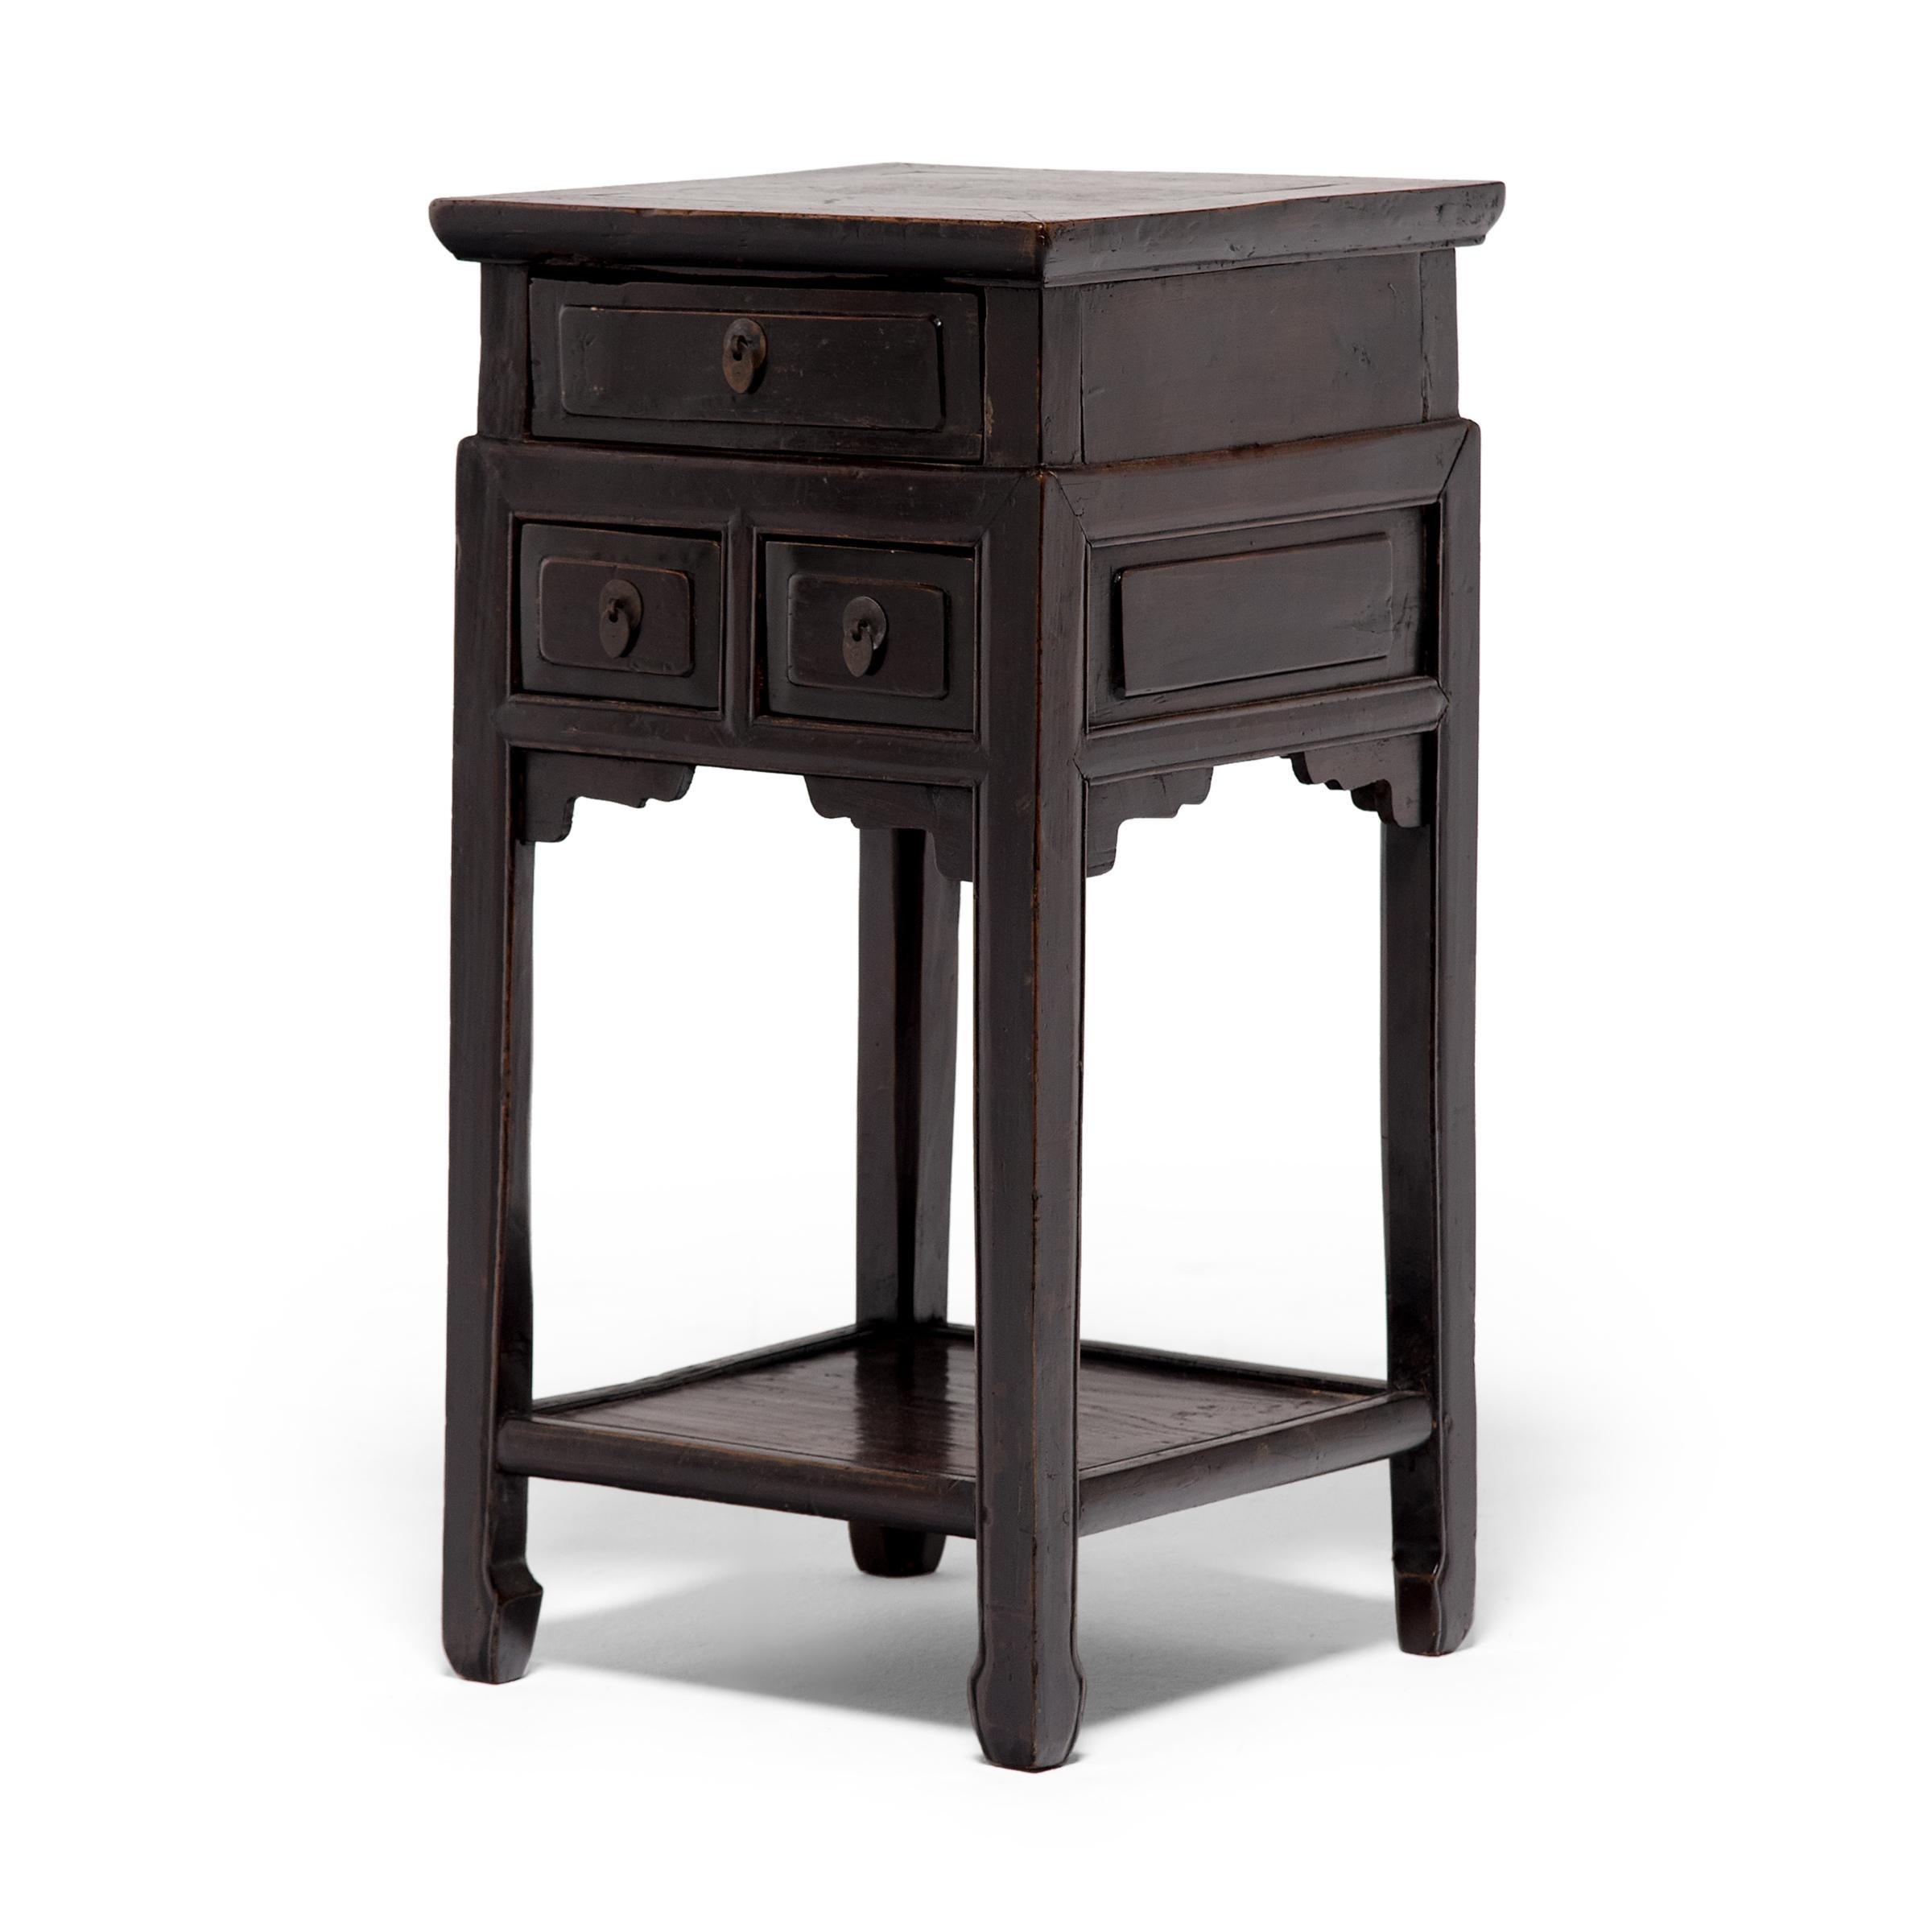 Popularized during the Ming dynasty (1368-1644), tall display tables such as this were used to display precious objects, serve tea, or elevate burning incense. This square example dates to the mid-19th century and features a lower shelf and three